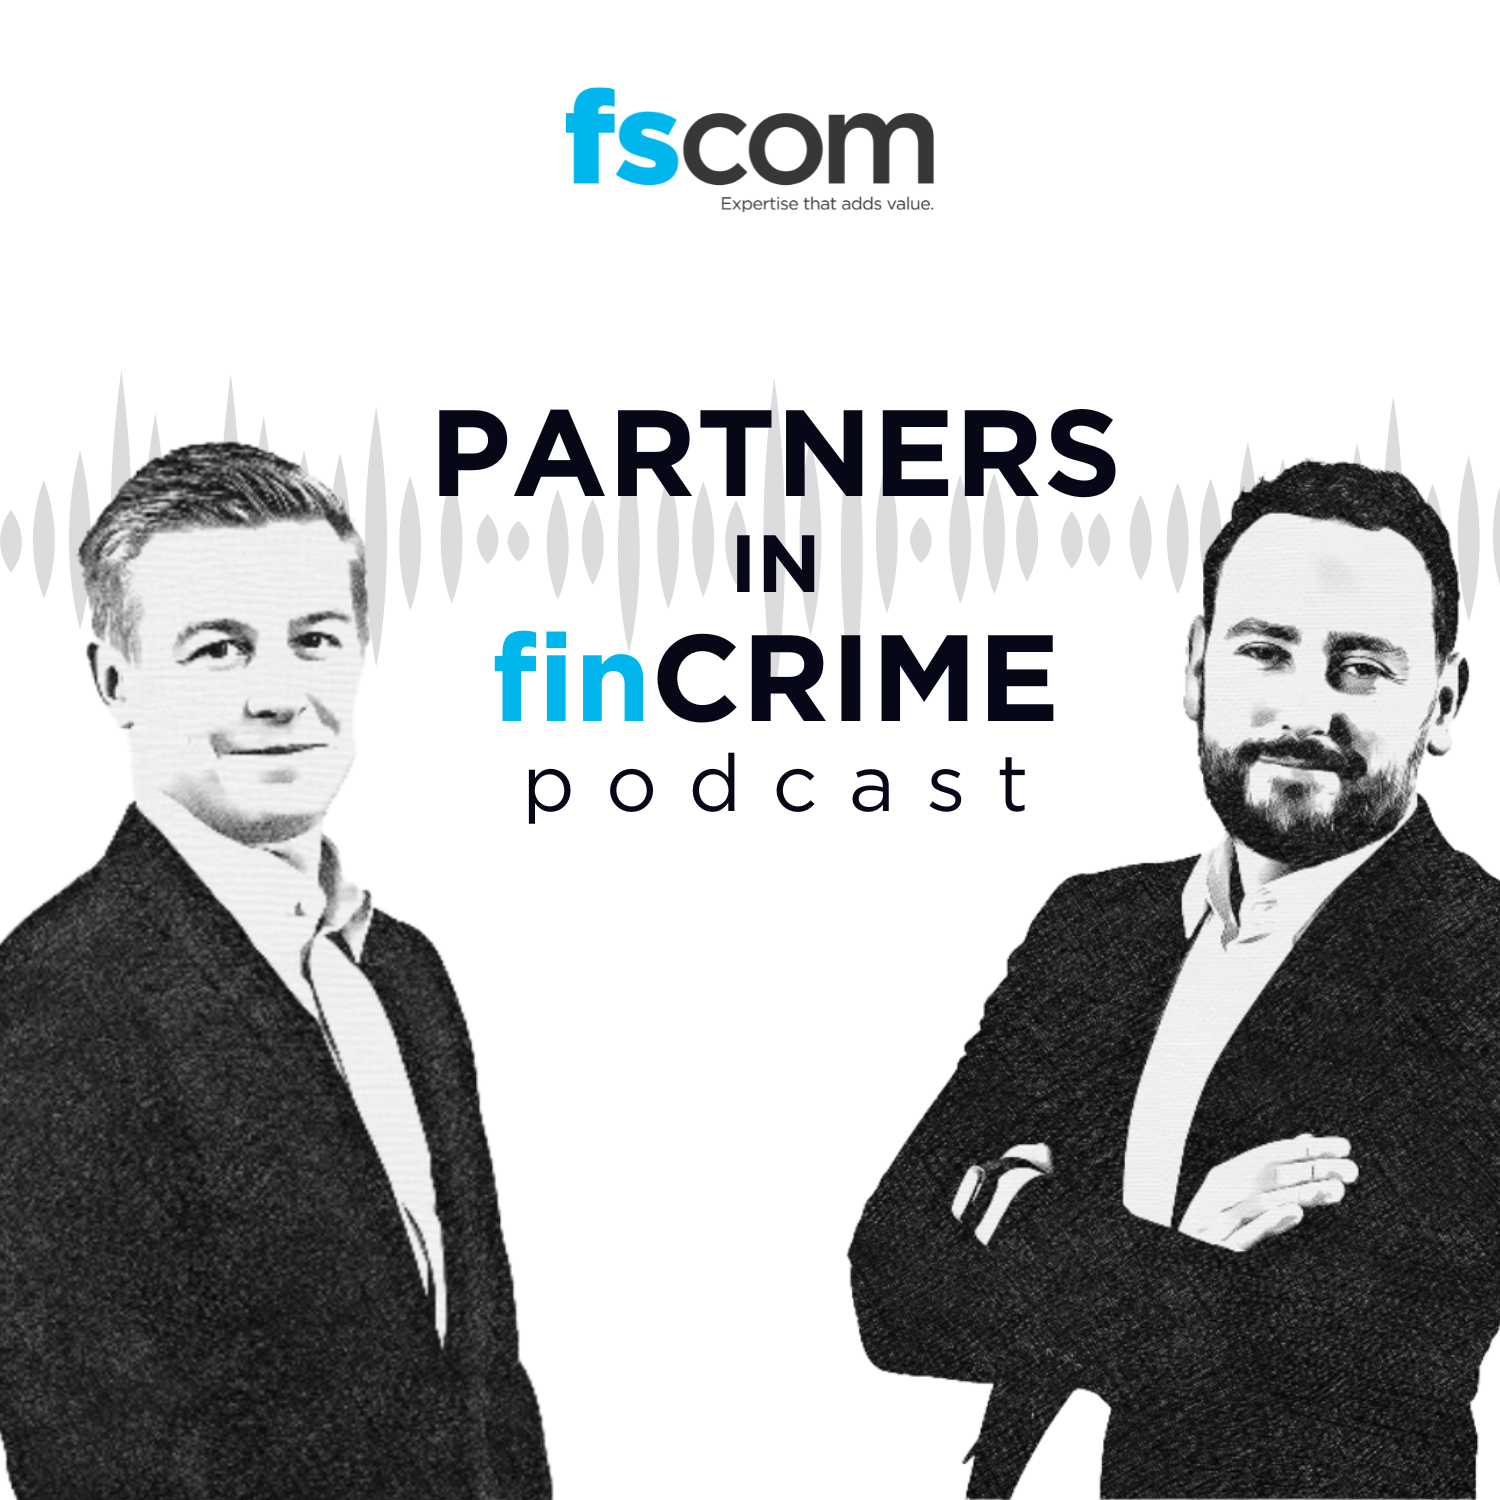 Partners in finCrime